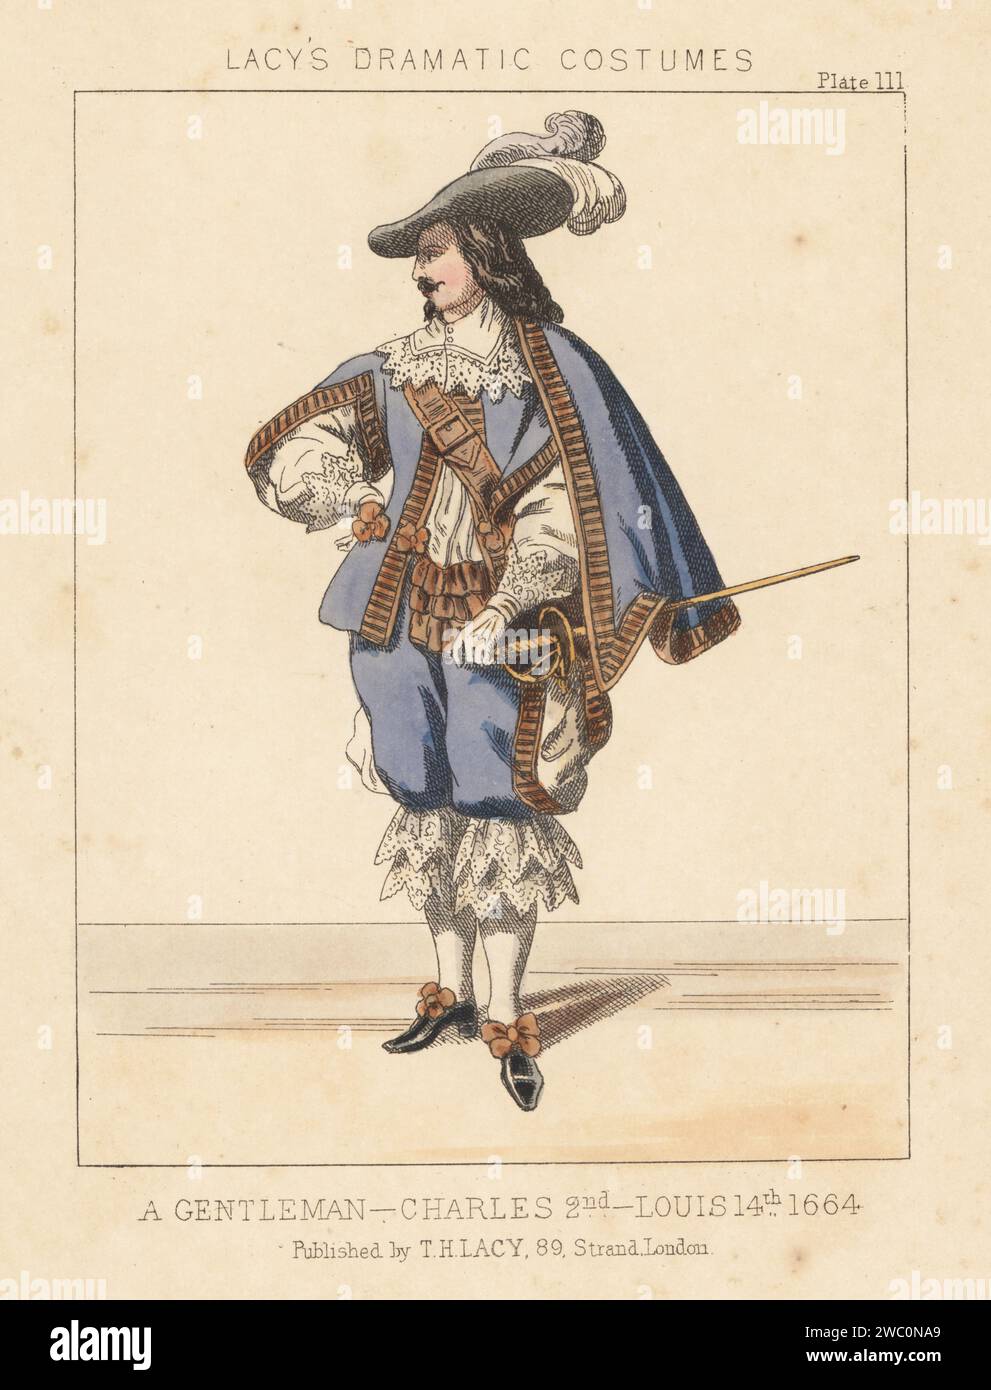 A gentleman, reign of King Charles II or Louis XIV, 1664. Handcoloured lithograph from Thomas Hailes Lacy's Male Costumes, Historical, National and Dramatic in 200 Plates, London, 1865. Lacy (1809-1873) was a British actor, playwright, theatrical manager and publisher. Stock Photo